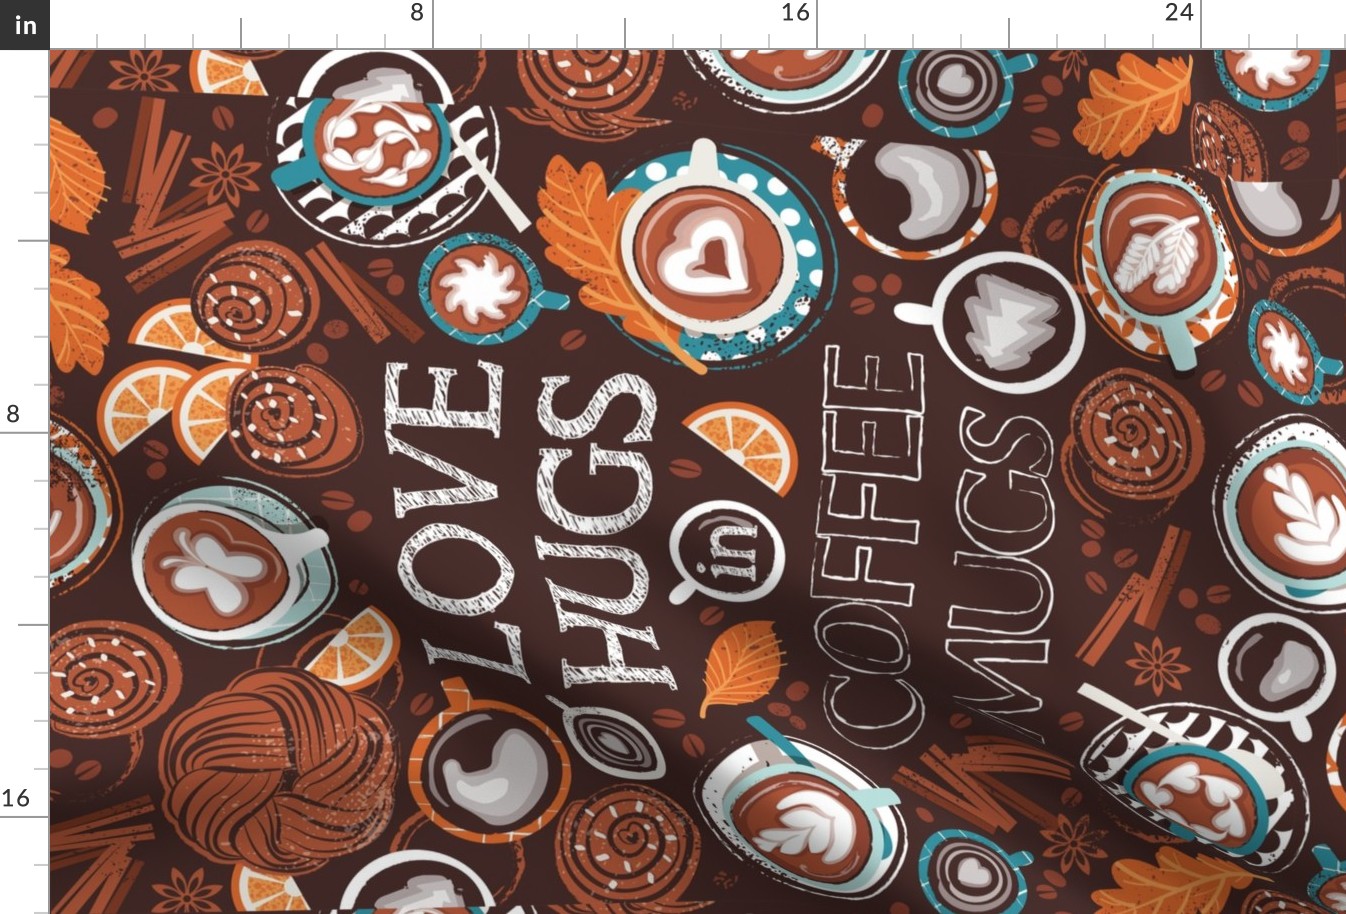 Love hugs in coffee mugs TEA TOWEL or WALL HANGING // expresso brown background lagoon orange and aqua cups and plates autumn leaves delicious cinnamon buns and cakes coffee stains and beans with quote